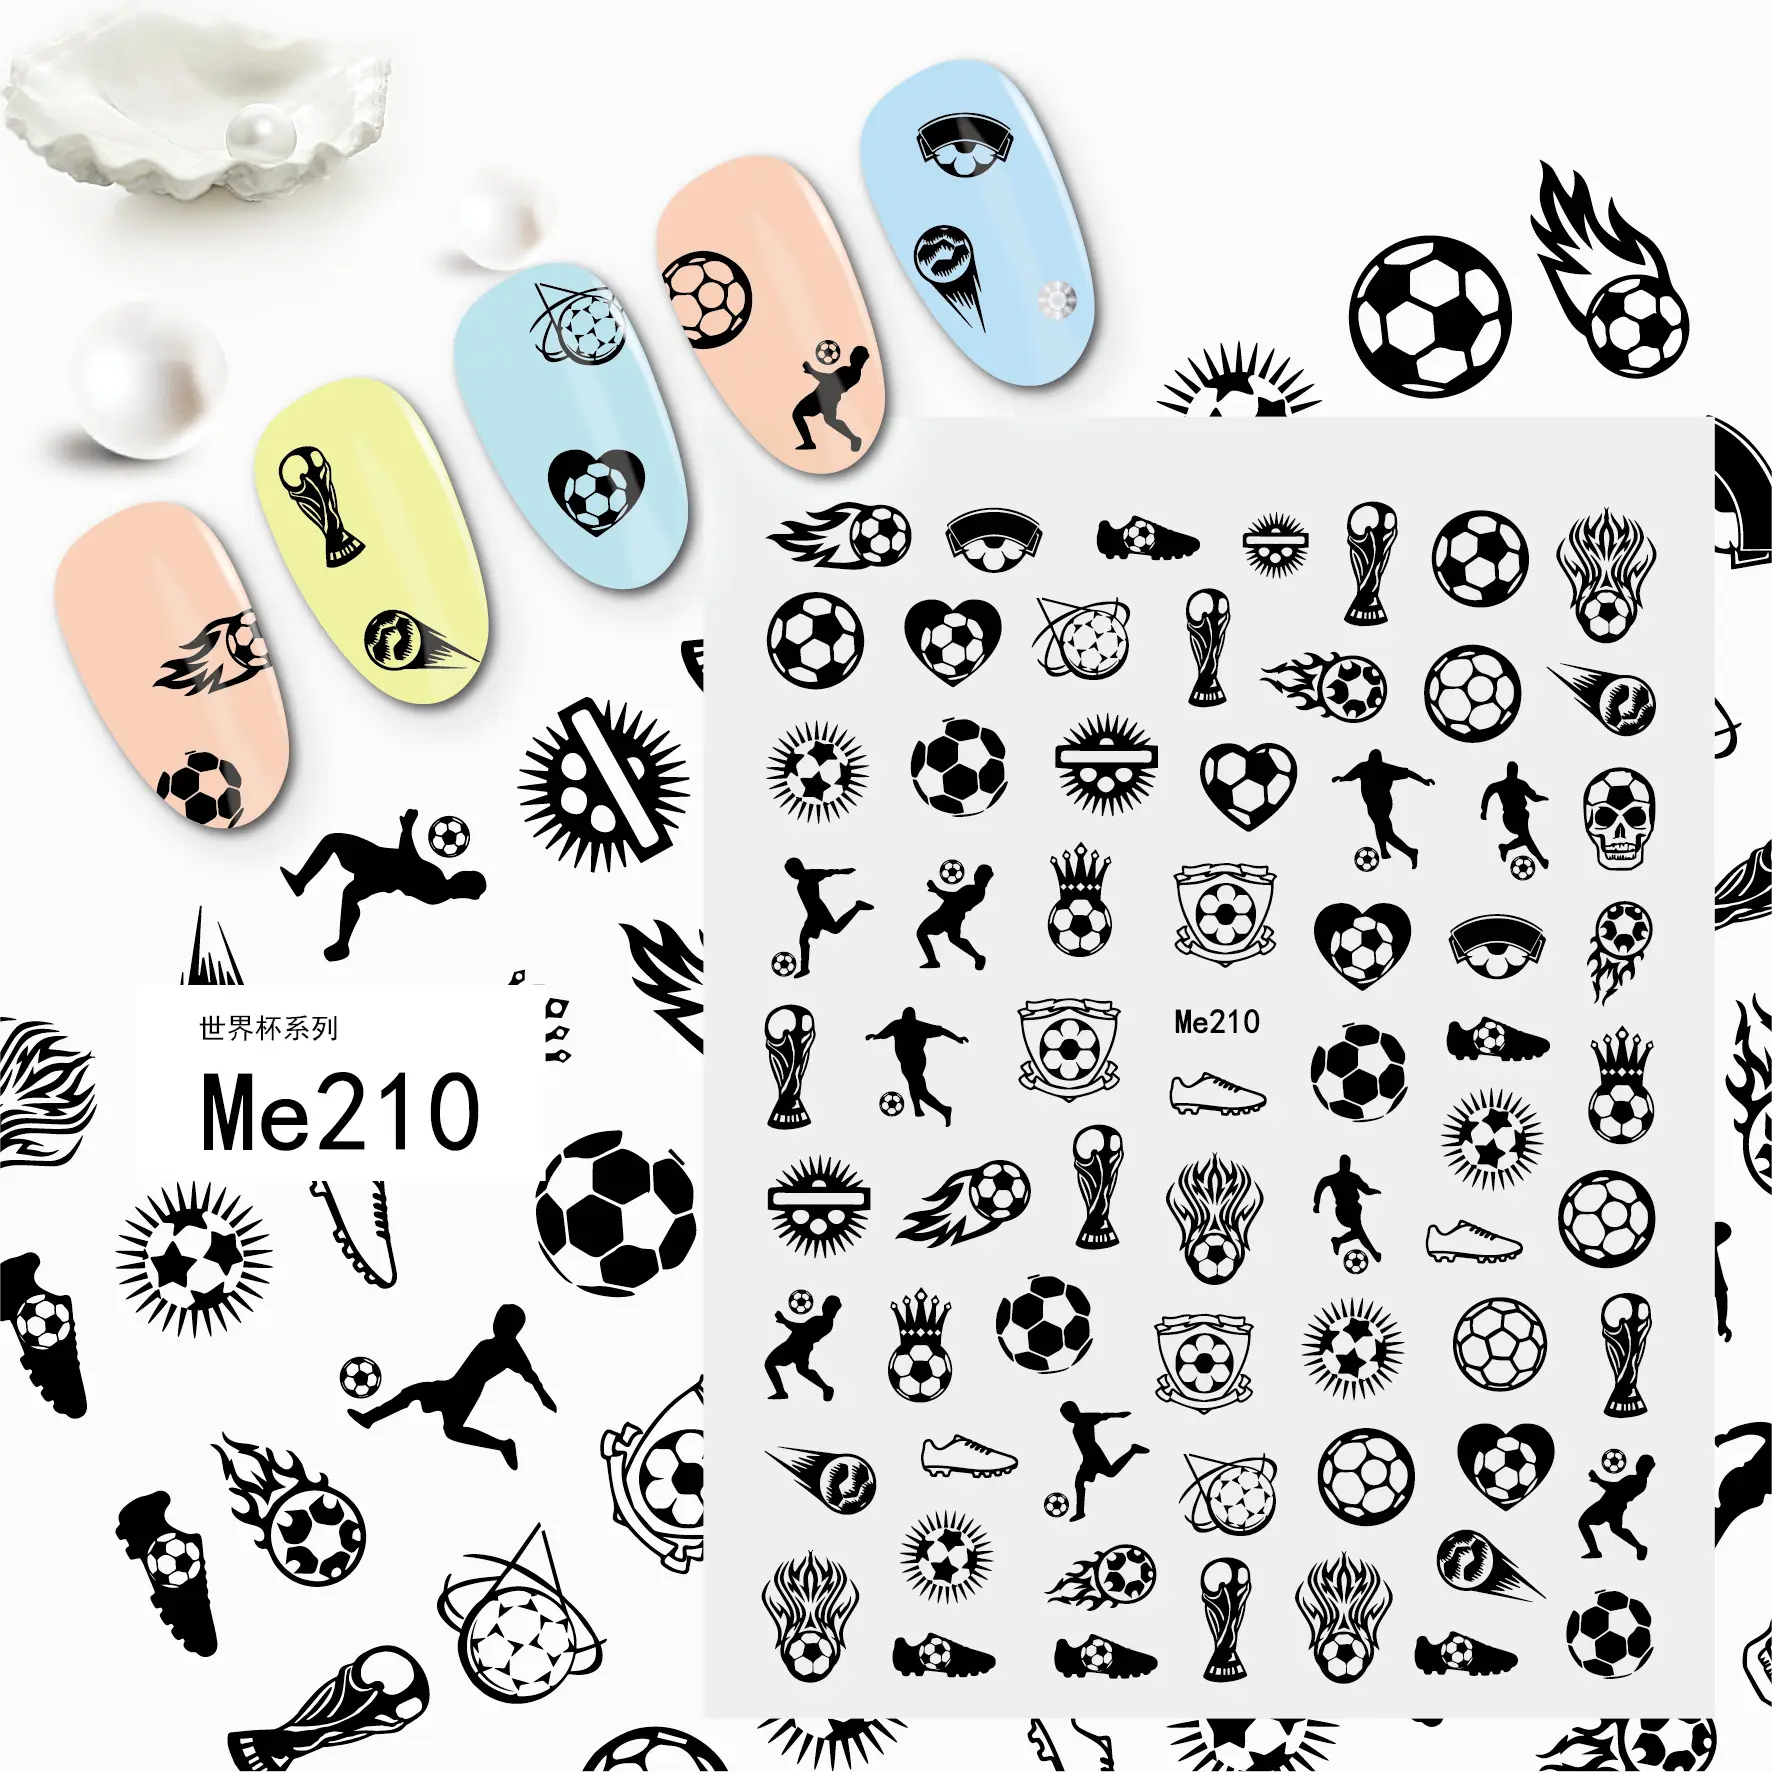 Foretrend Hot Selling Nail Art Stickers, Decals Laser Multi-design DIY Football Stickers Water Transfer Nail Sticker